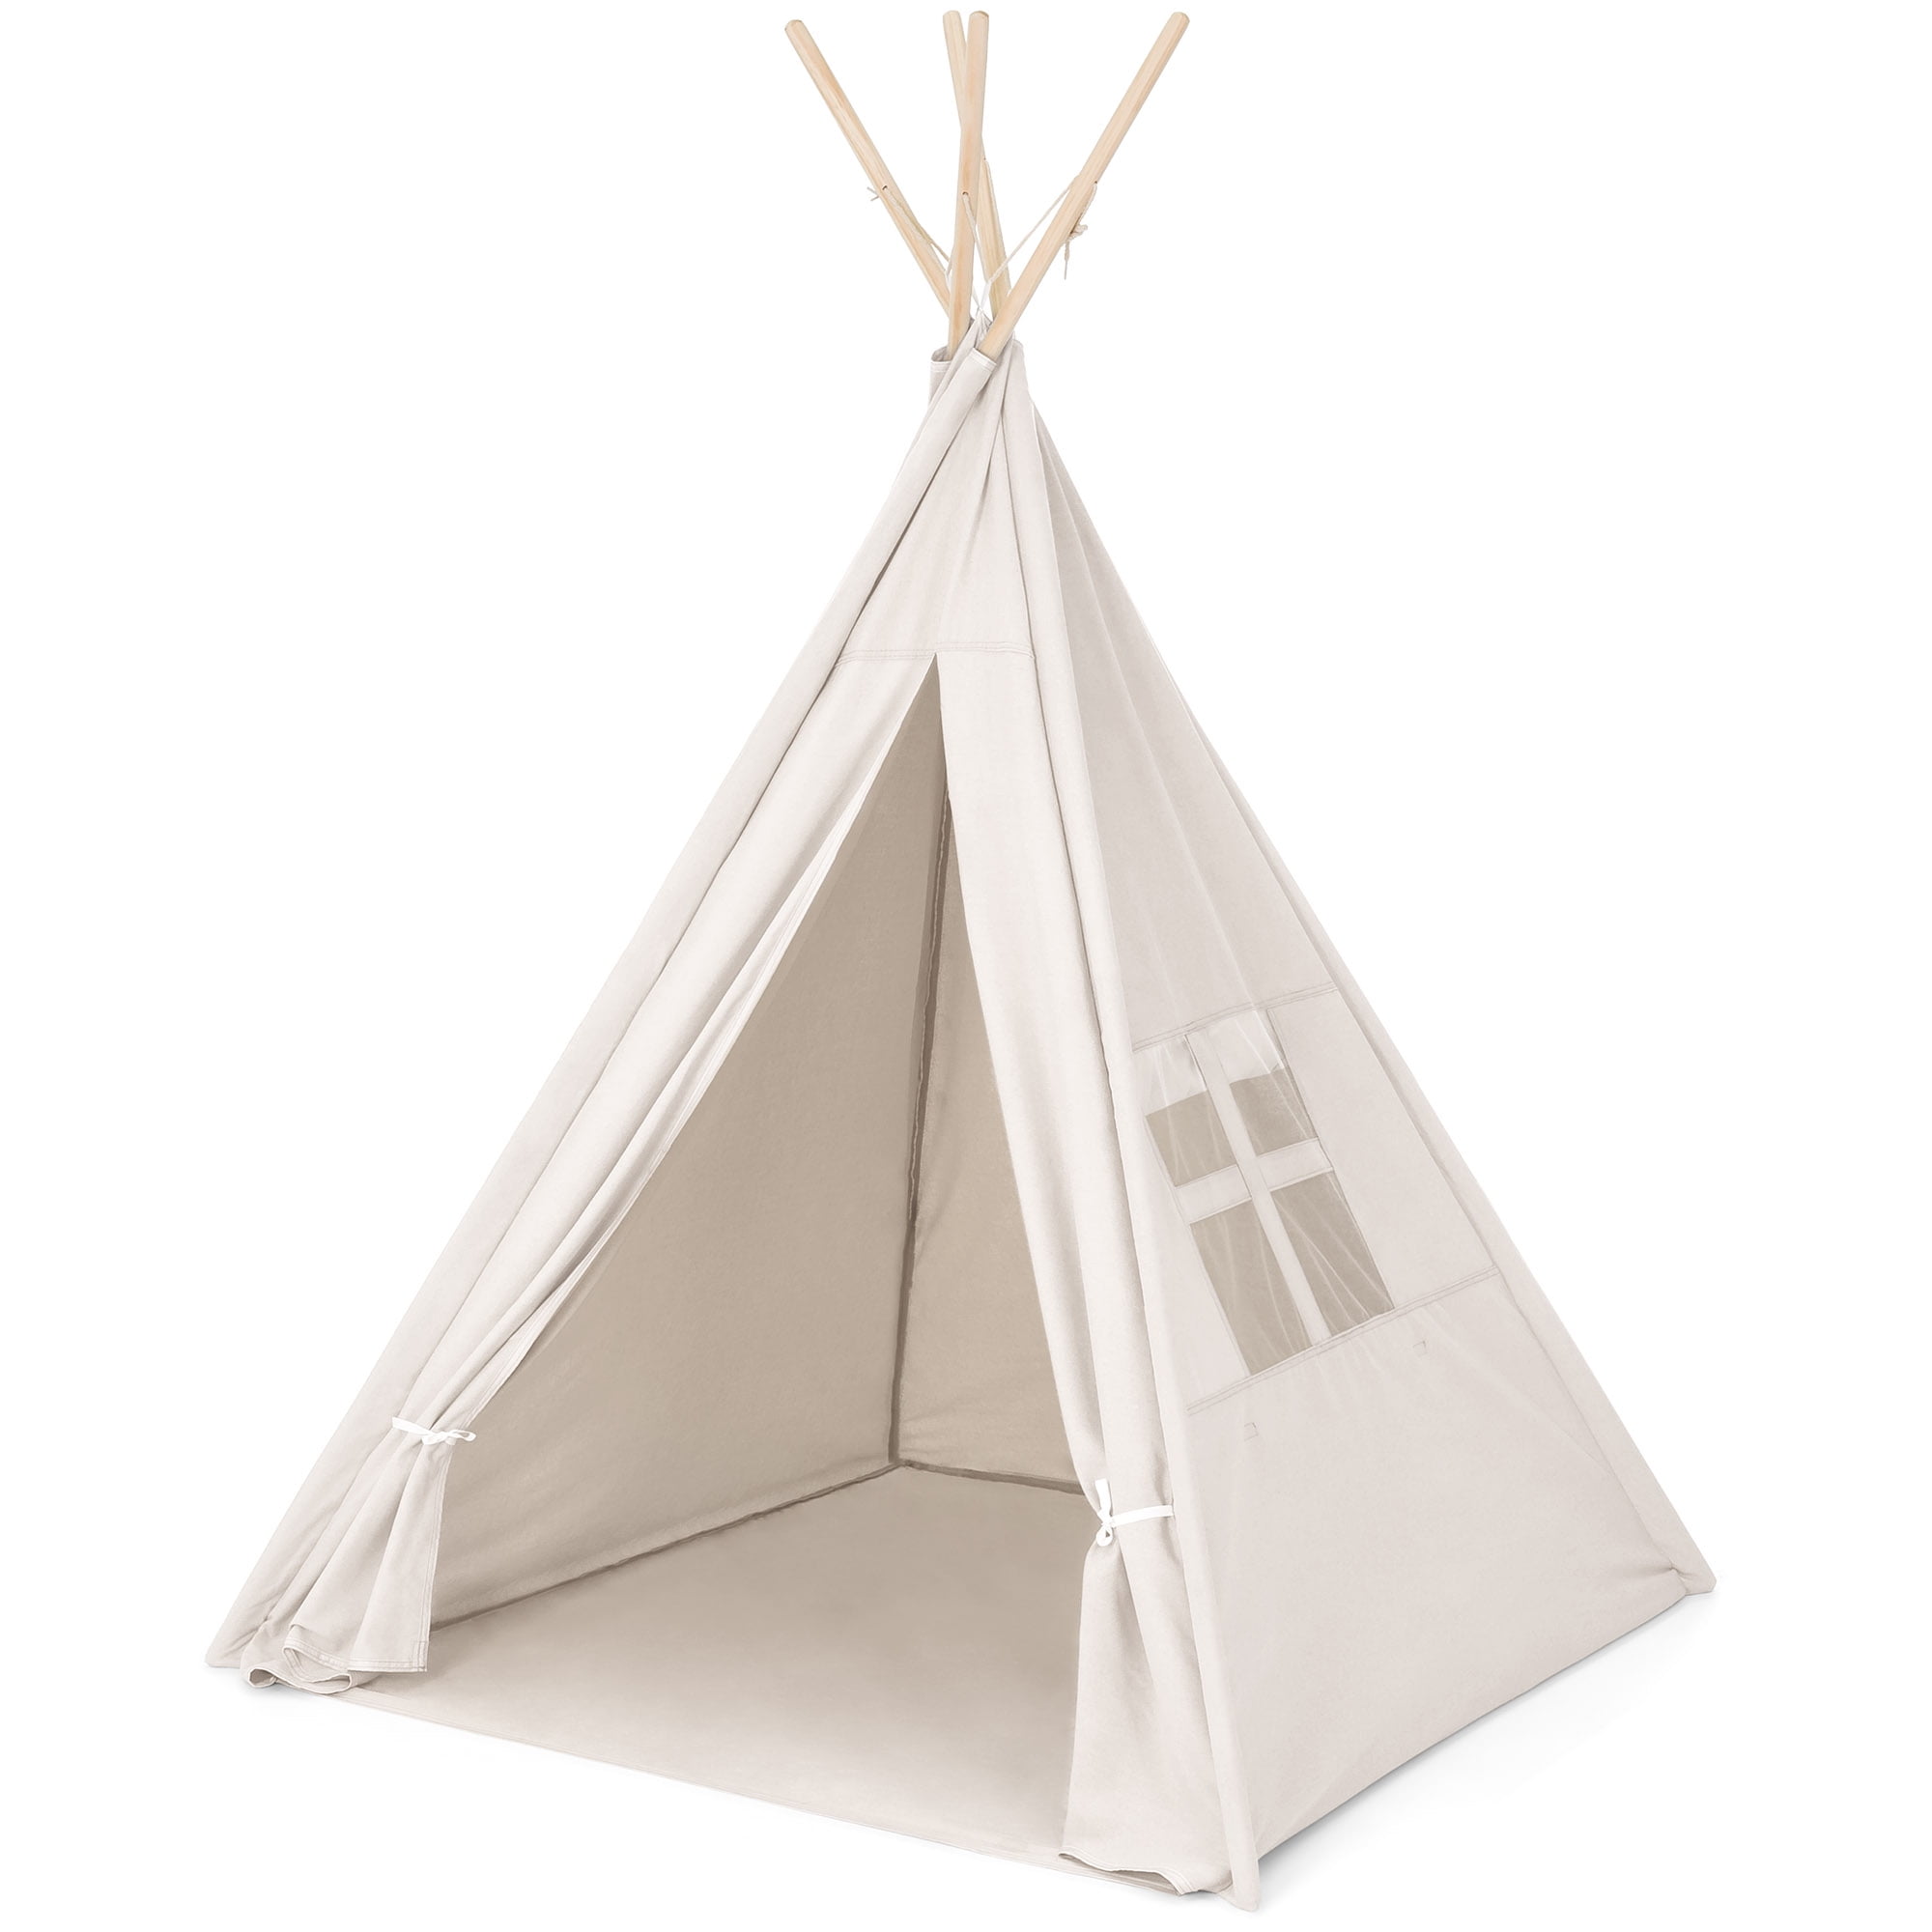 Best Choice Products 10x10 Teepee Camping Tent Family Outdoor Sleeping Dome W// Carry Bag